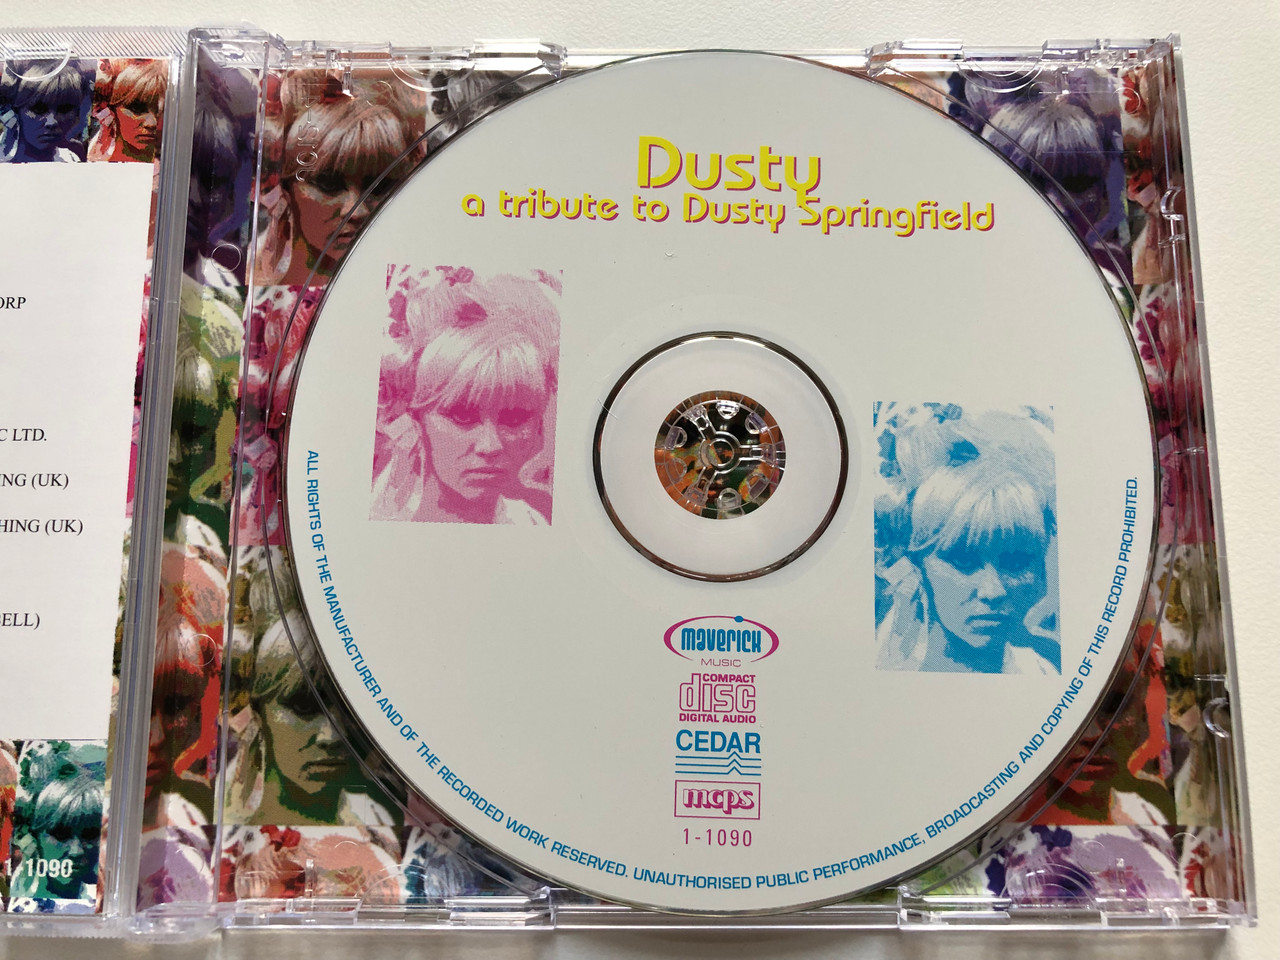 https://cdn10.bigcommerce.com/s-62bdpkt7pb/products/0/images/190538/Dusty_-_A_Tribute_To_Dusty_Springfield_-_Performed_by_Studio_99_Includes_Son_Of_A_Preacher_Man_I_Only_Want_To_Be_With_You_I_Just_Dont_Know_What_To_Do_With_Myself_and_many_more_Maveric_3__99621.1631025416.1280.1280.JPG?c=2&_gl=1*14e8316*_ga*MjA2NTIxMjE2MC4xNTkwNTEyNTMy*_ga_WS2VZYPC6G*MTYzMTAxOTAzNi42OC4xLjE2MzEwMjUxNzQuMzk.